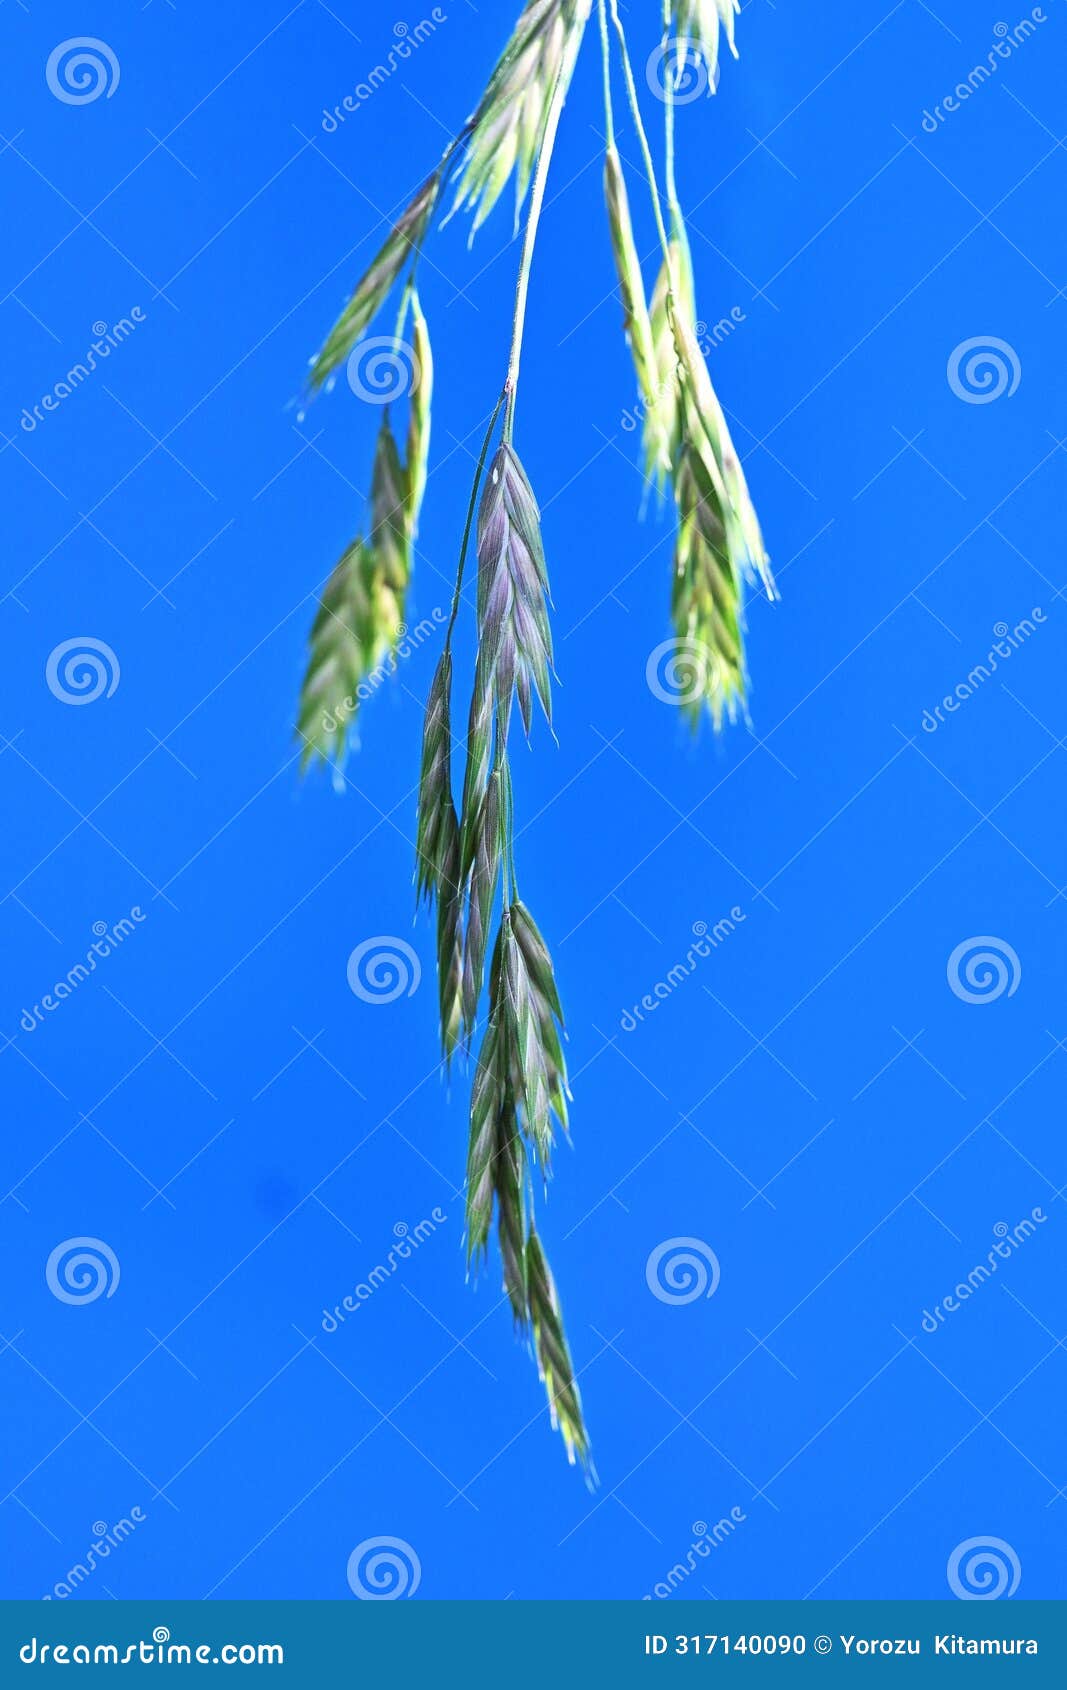 rescue grass ( bromus catharticus ) spikelet. poaceae perennial weed.